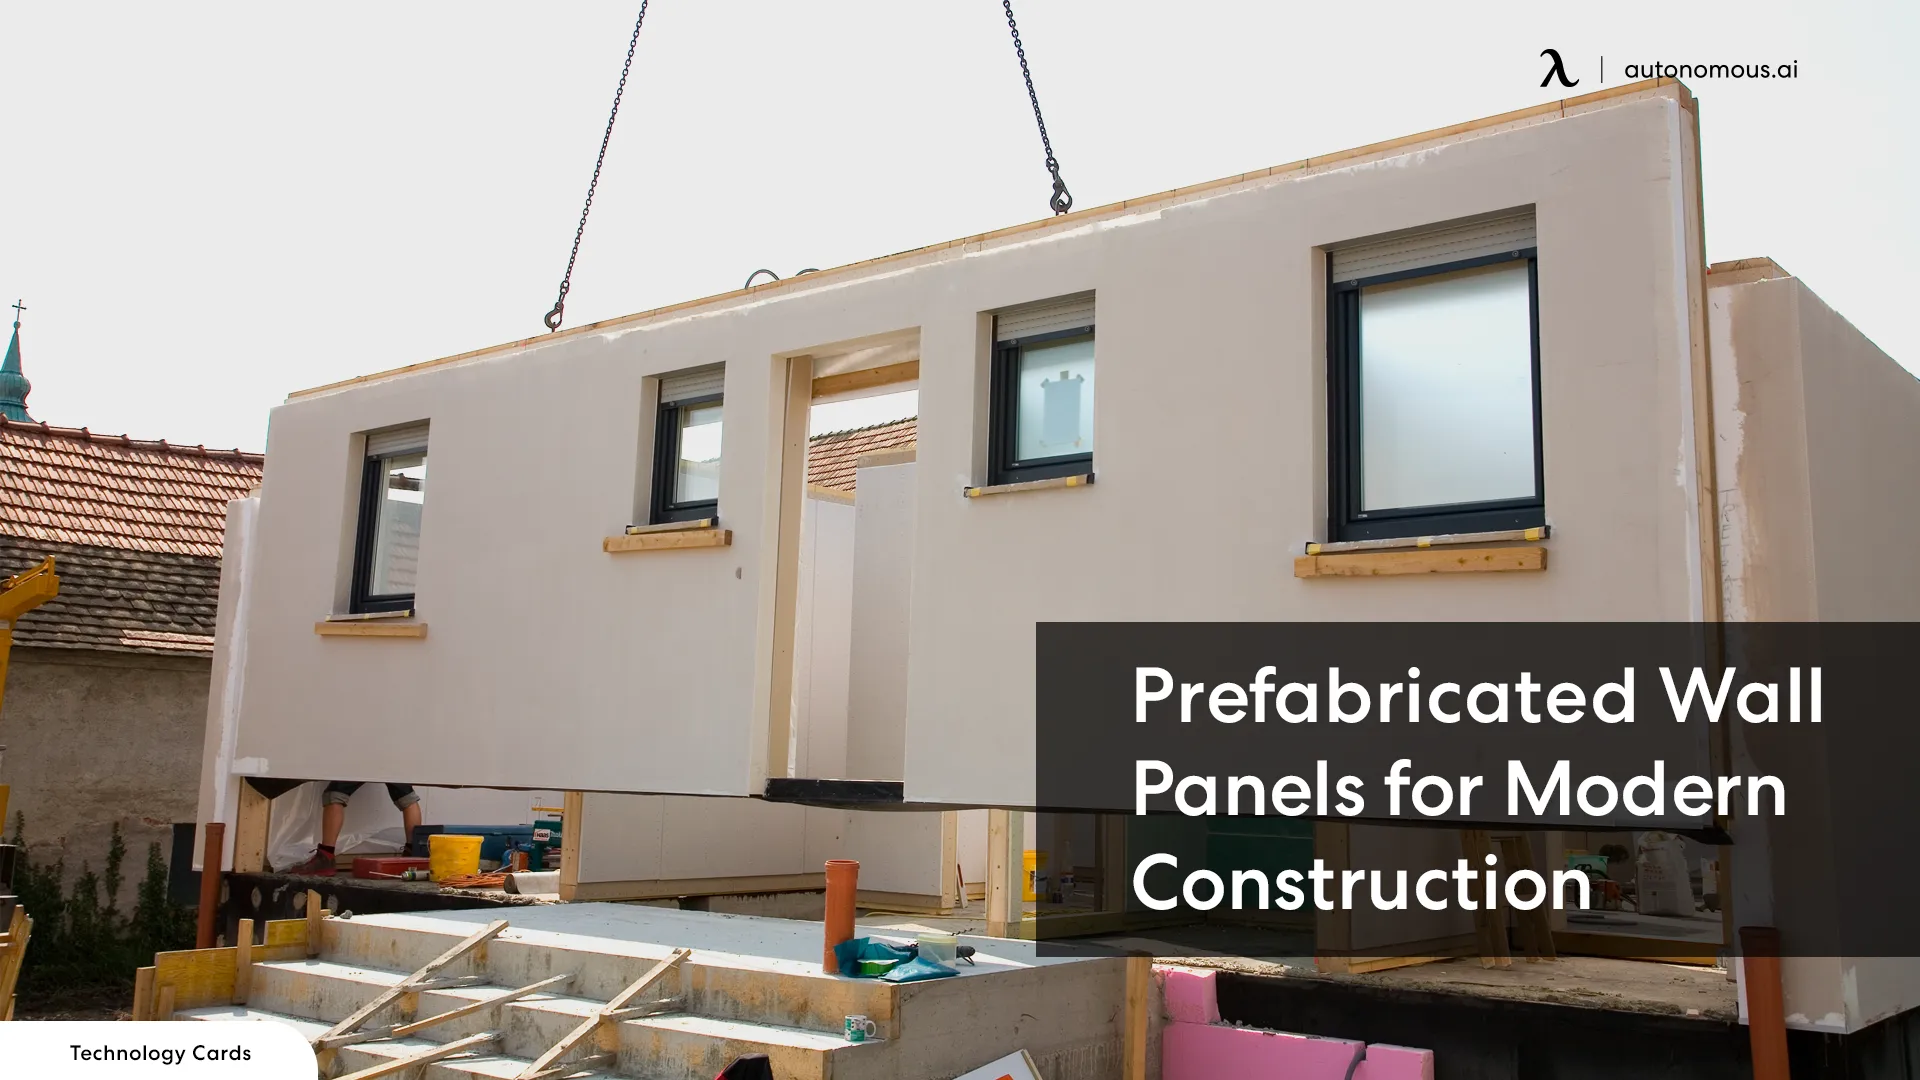 Efficient and Versatile: Prefabricated Wall Solutions for Modern Construction